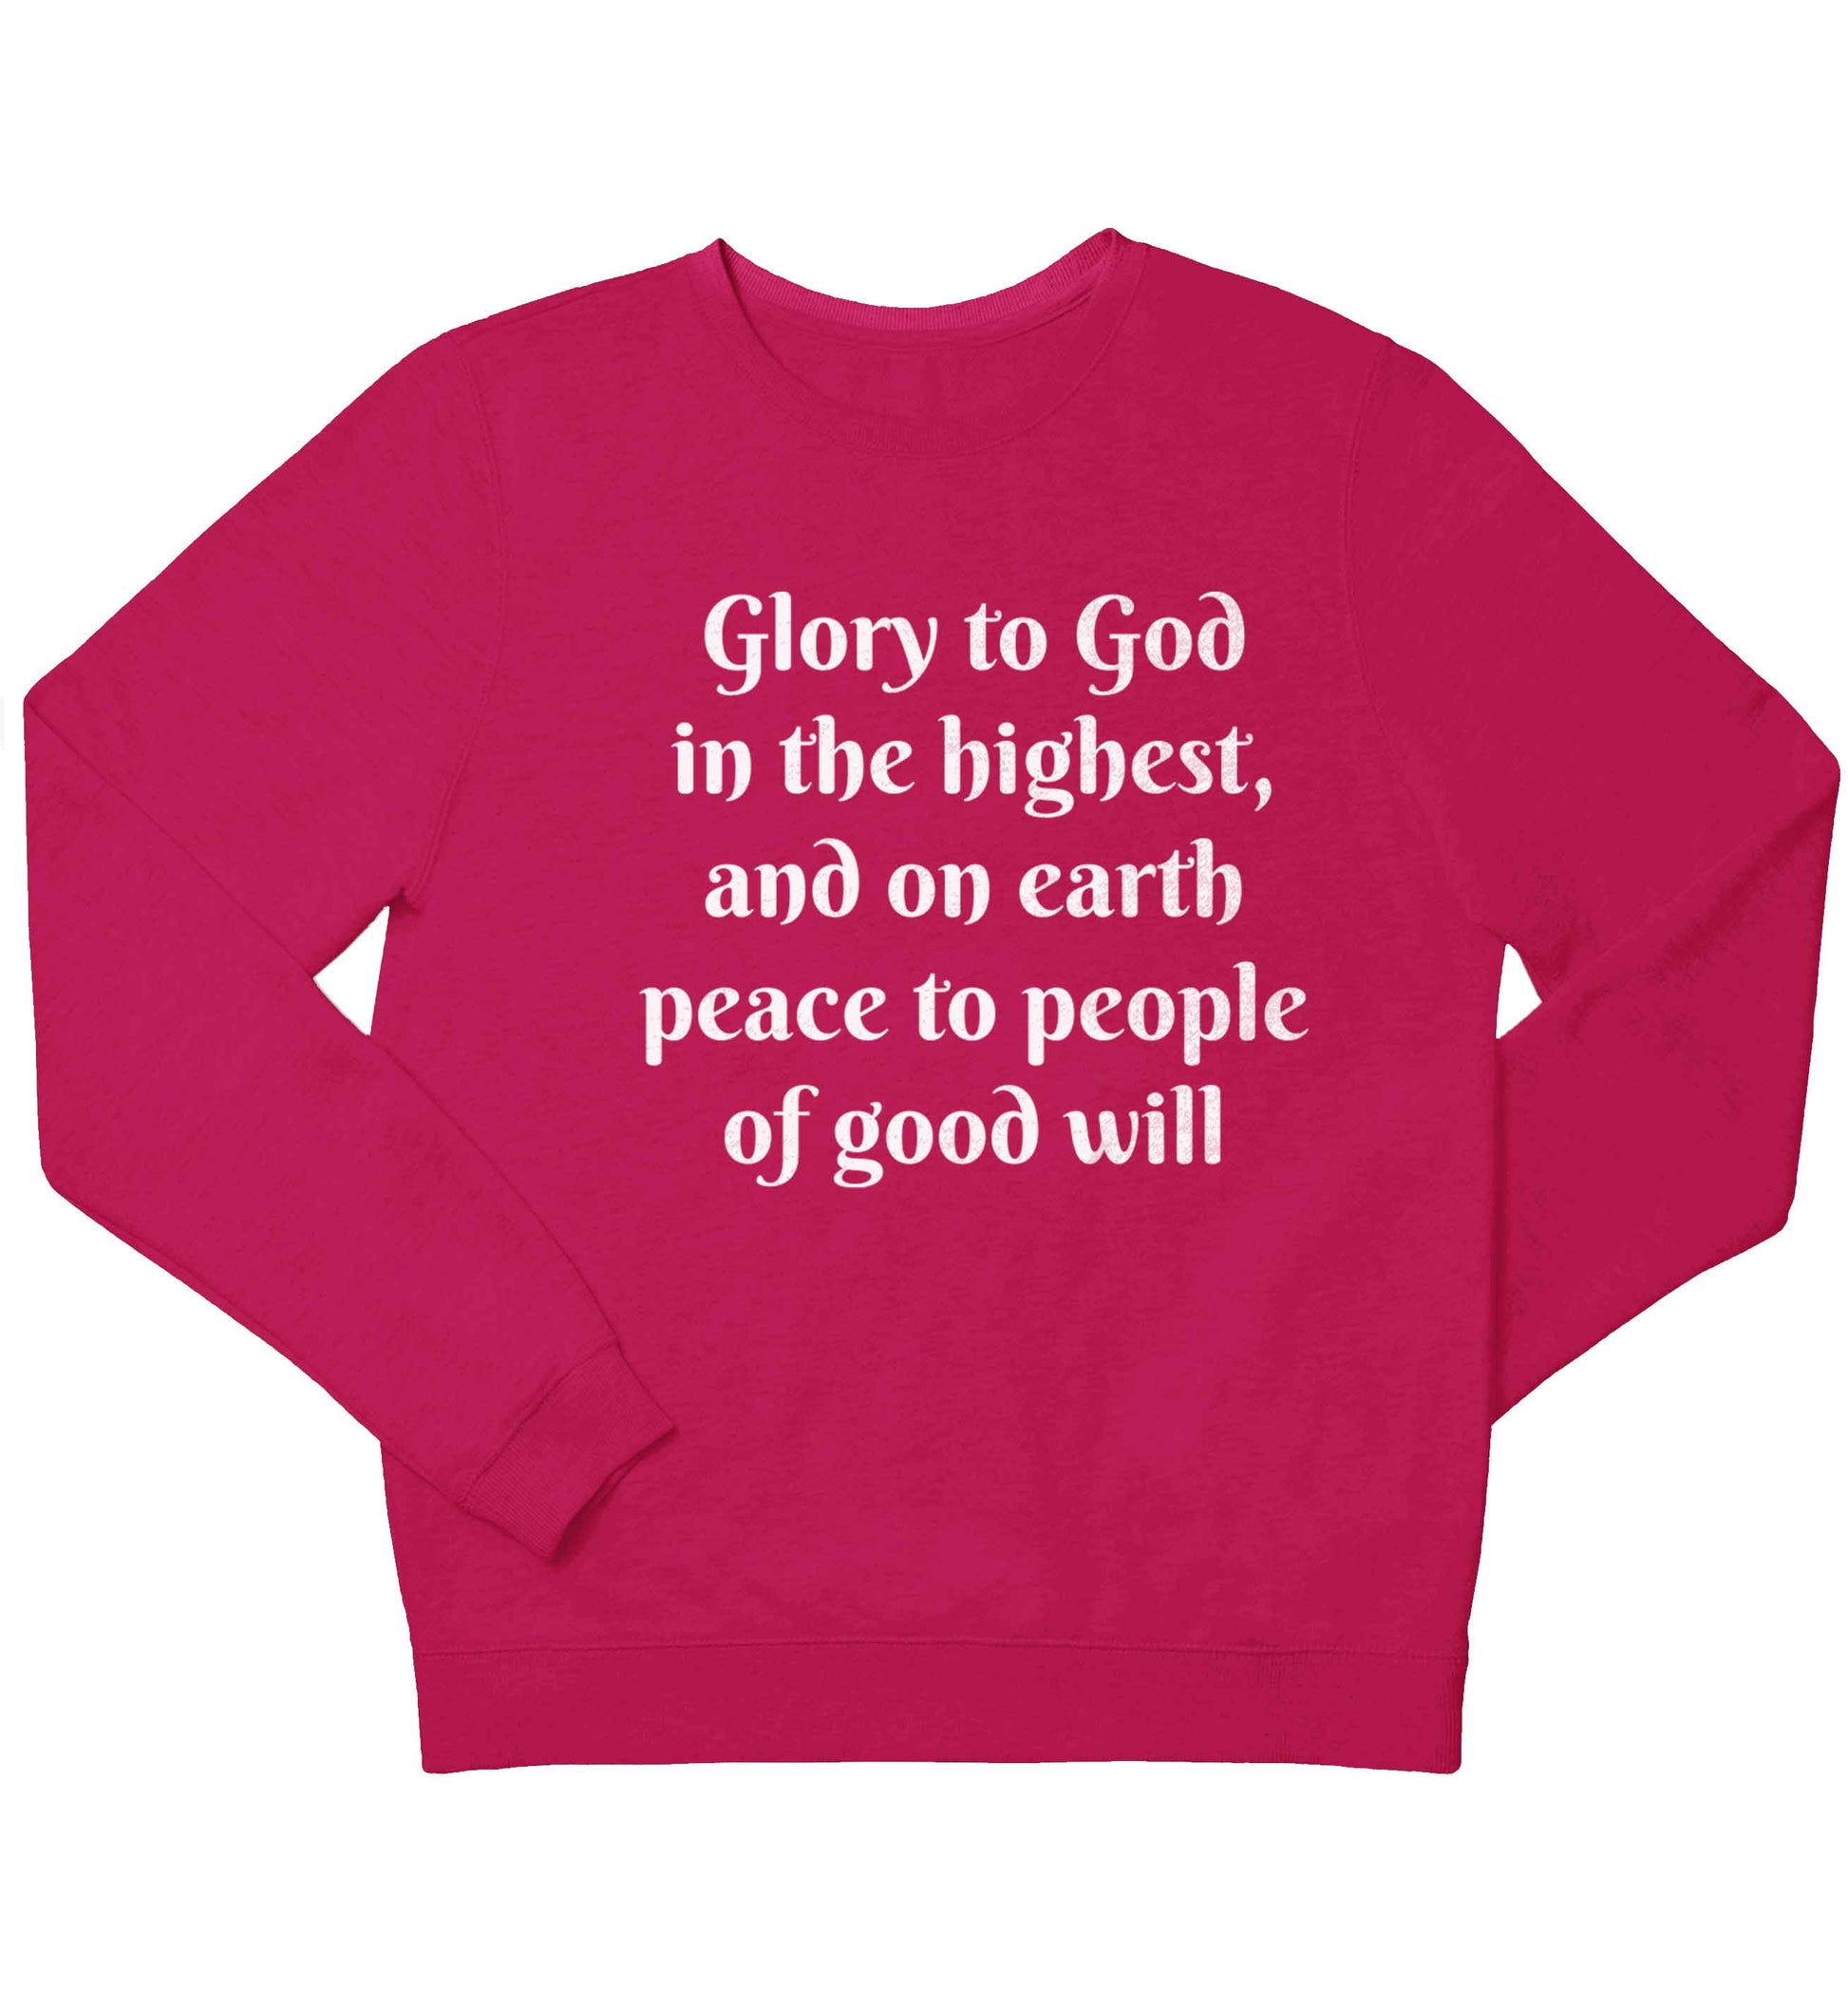 Glory to God in the highest, and on earth peace to people of good will children's pink sweater 12-13 Years